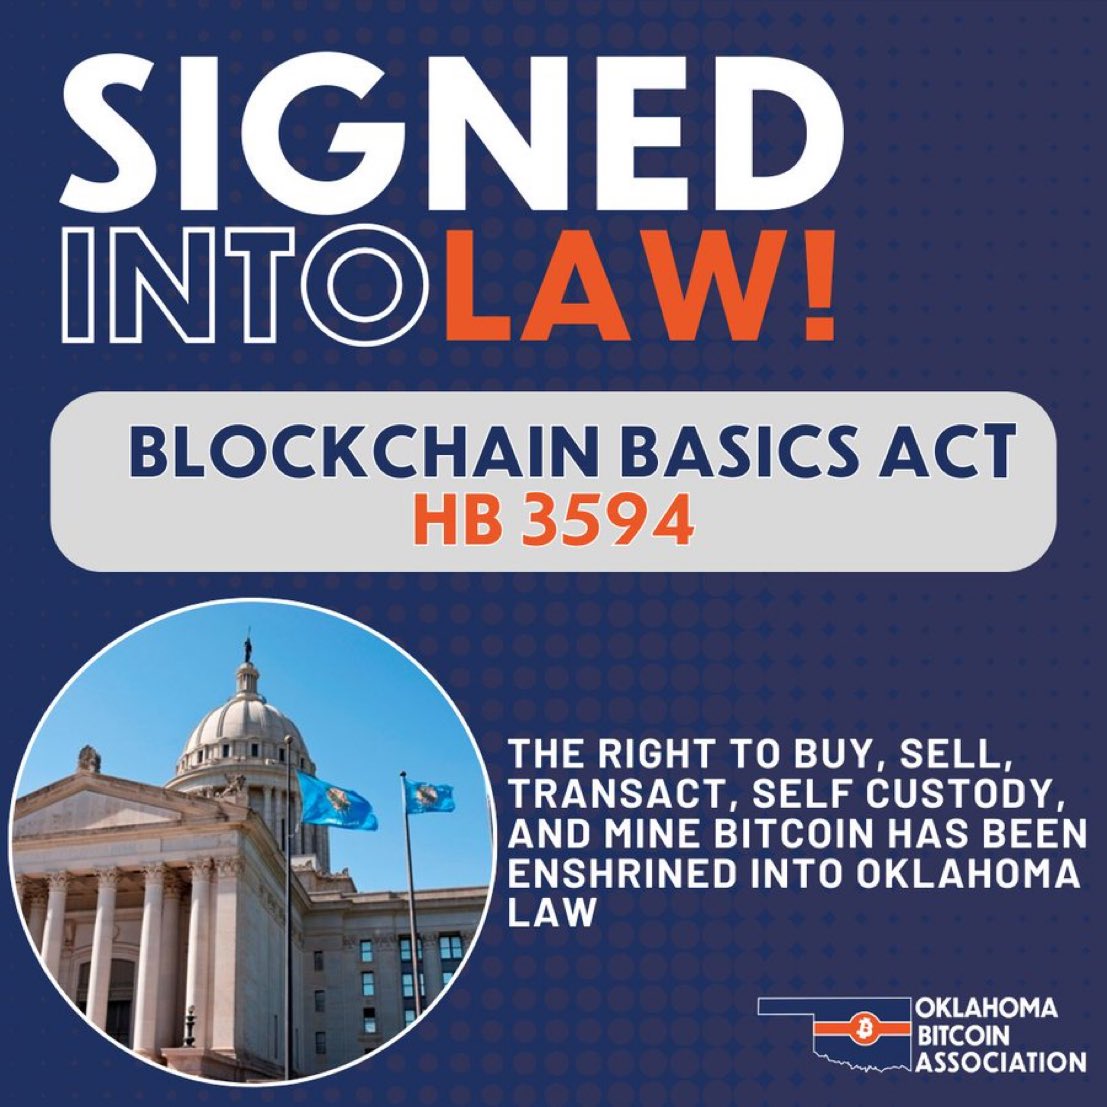 LATEST 🇺🇸 - Governor Kevin Stitt of Oklahoma has signed HB3594 into law:

“The law makes Oklahoma the FIRST State to codify the rights of its citizens to run a node, to mine, and to self-custody their Bitcoin.” -@oklahomabtc 

#Bitcoin